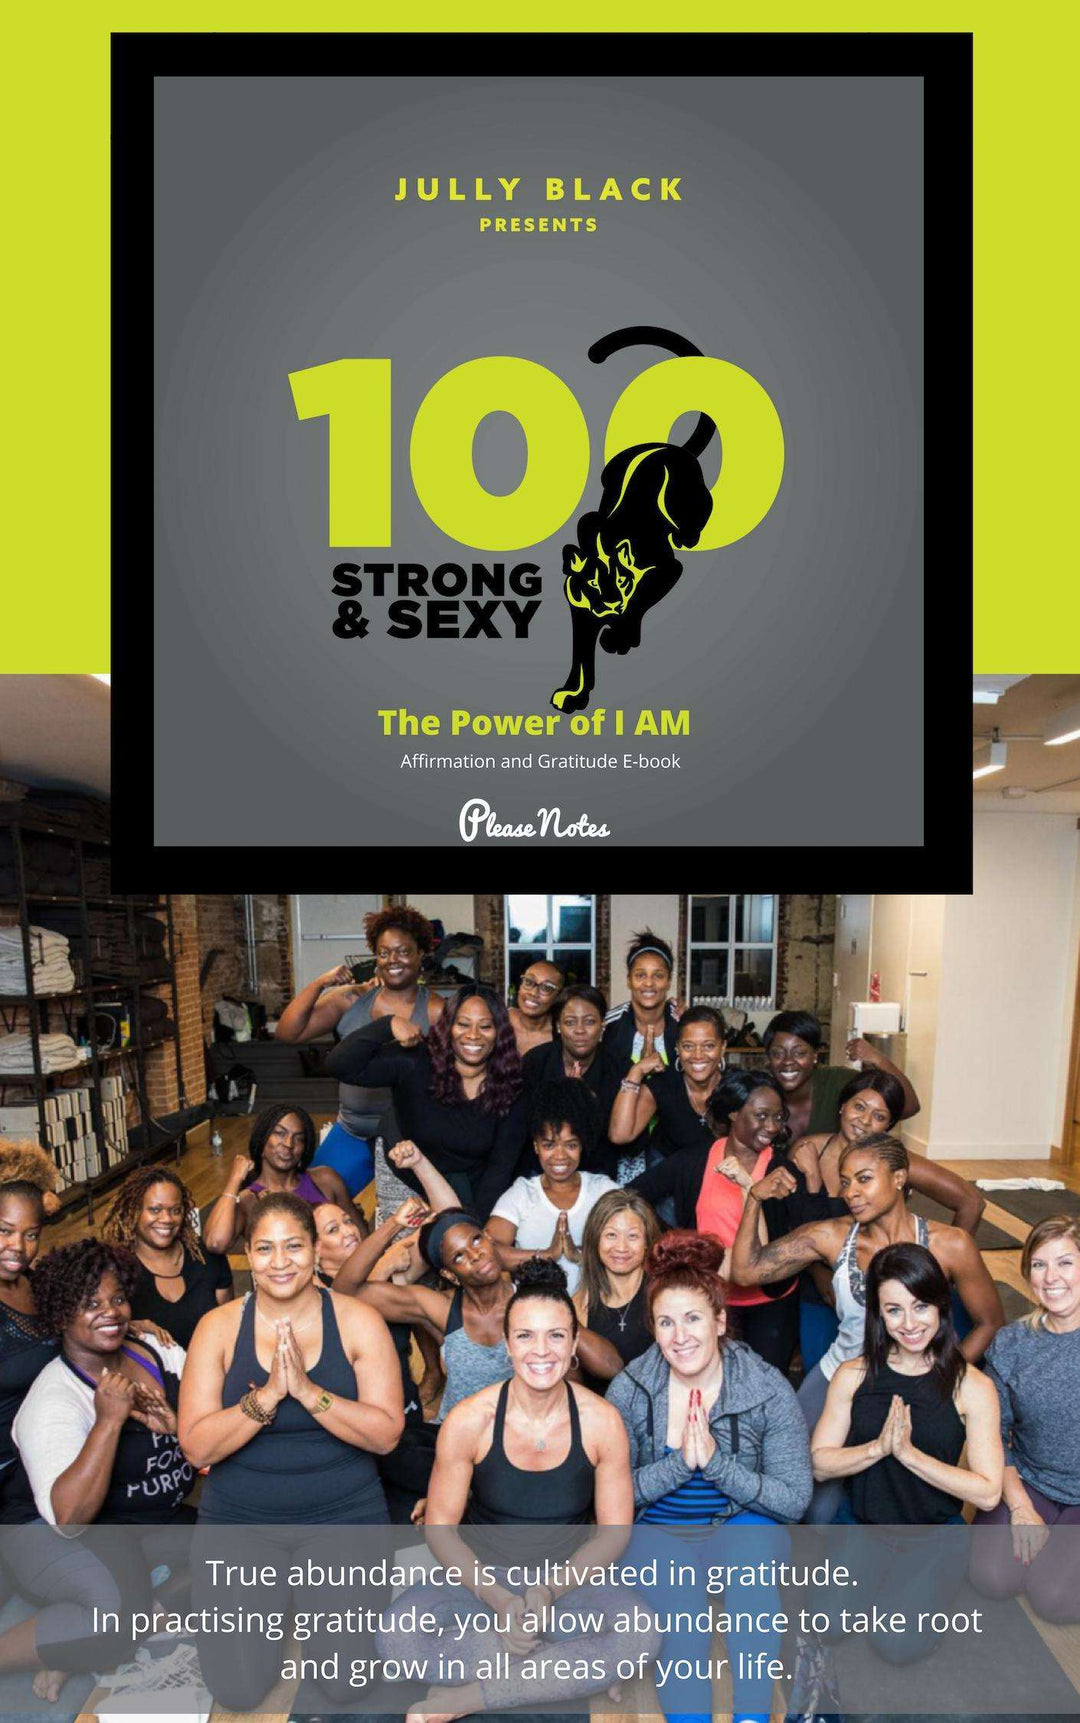 Jully Black Presents - 100 Strong and Sexy "The Power of I AM" Affirmation and Gratitude Book - PleaseNotes-E-Book